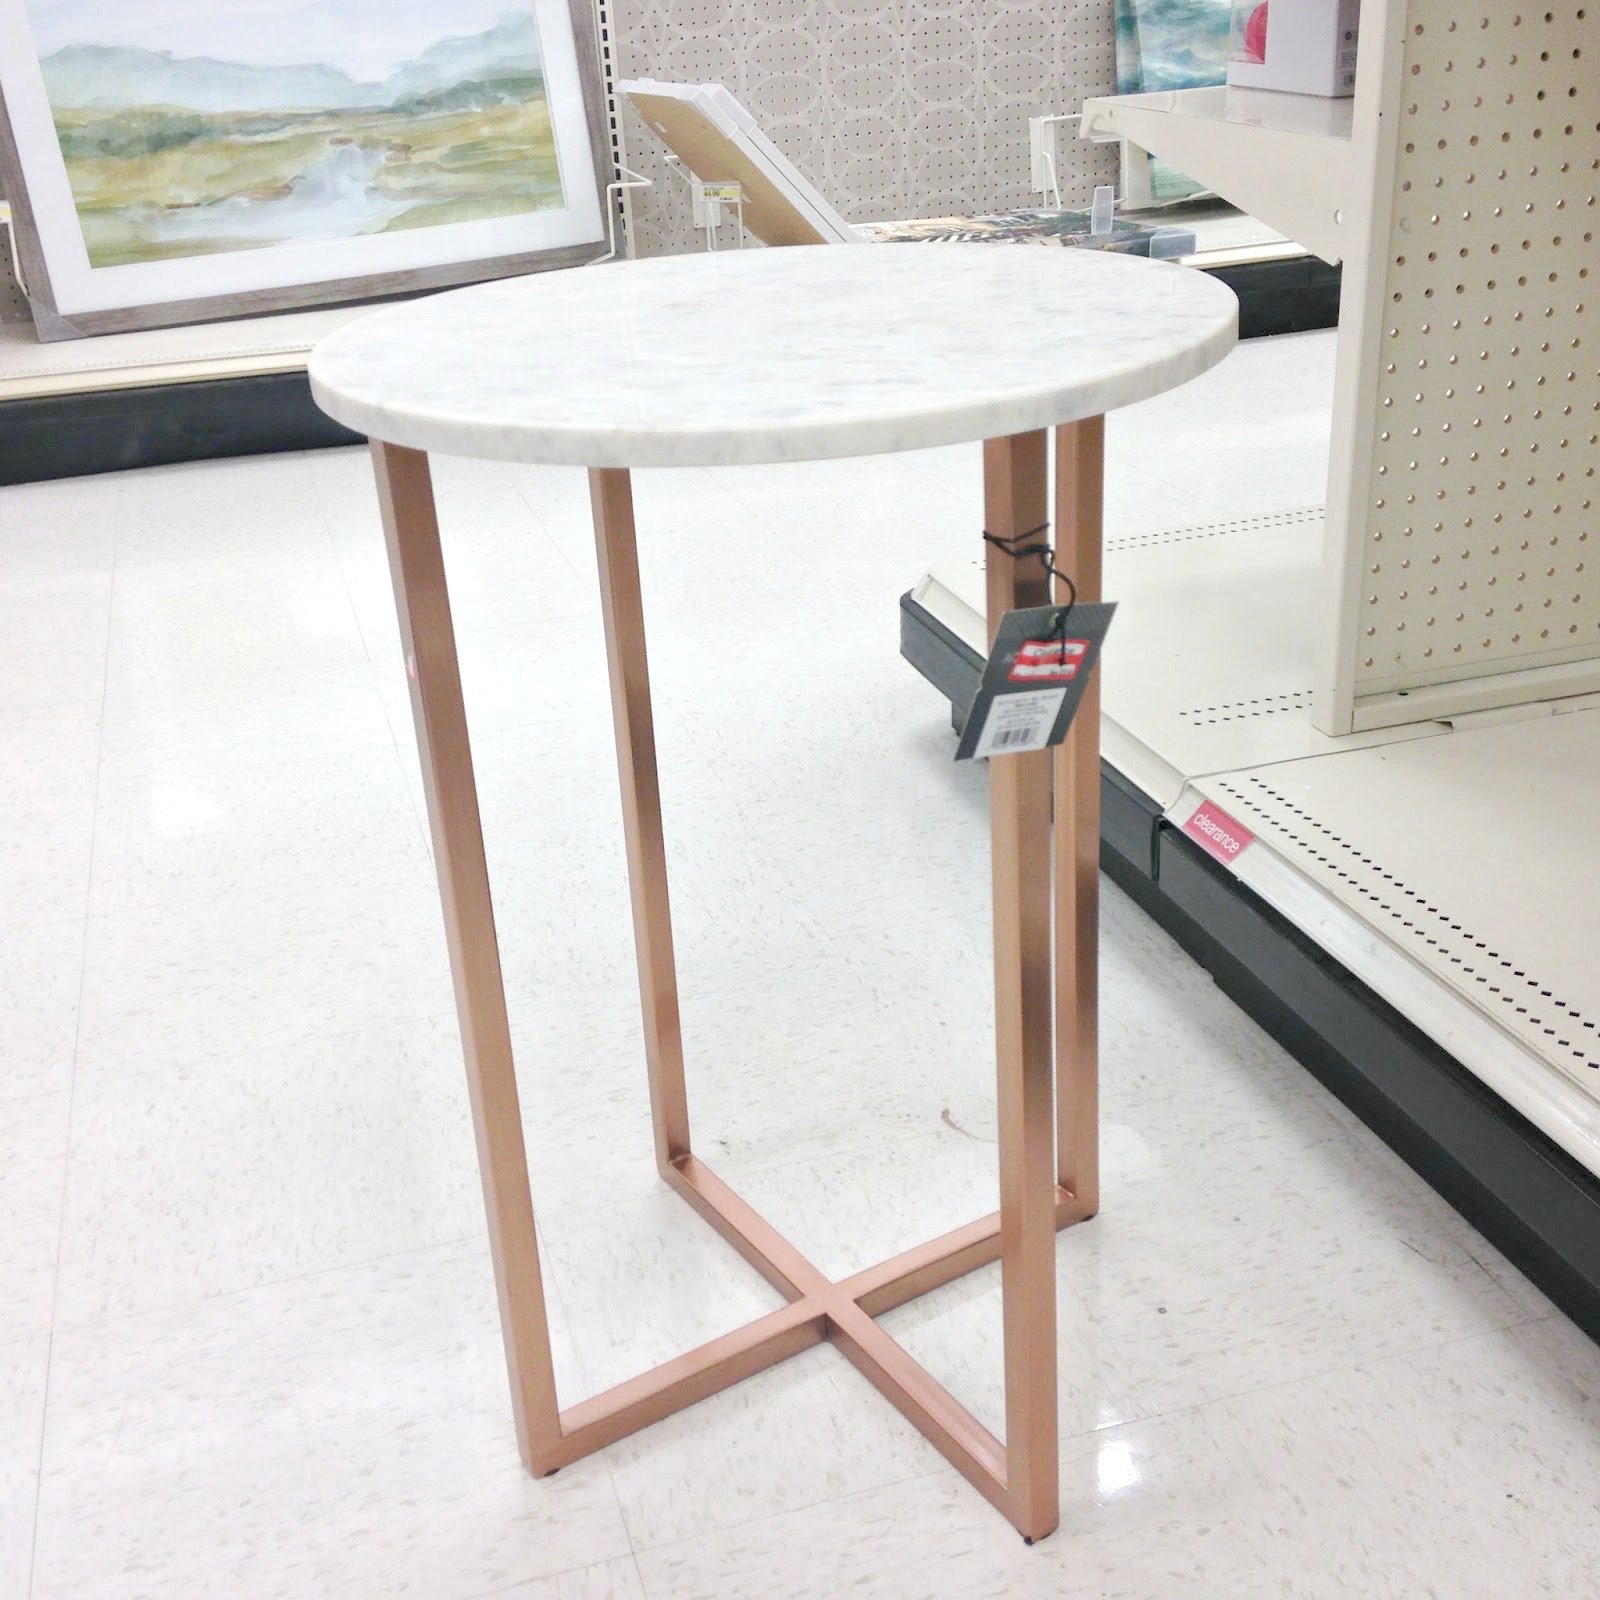 gold end table target modern coffee tables and accent exceptional rose marble off was this side great already knock popular trending styles for the season mersman pier one dining